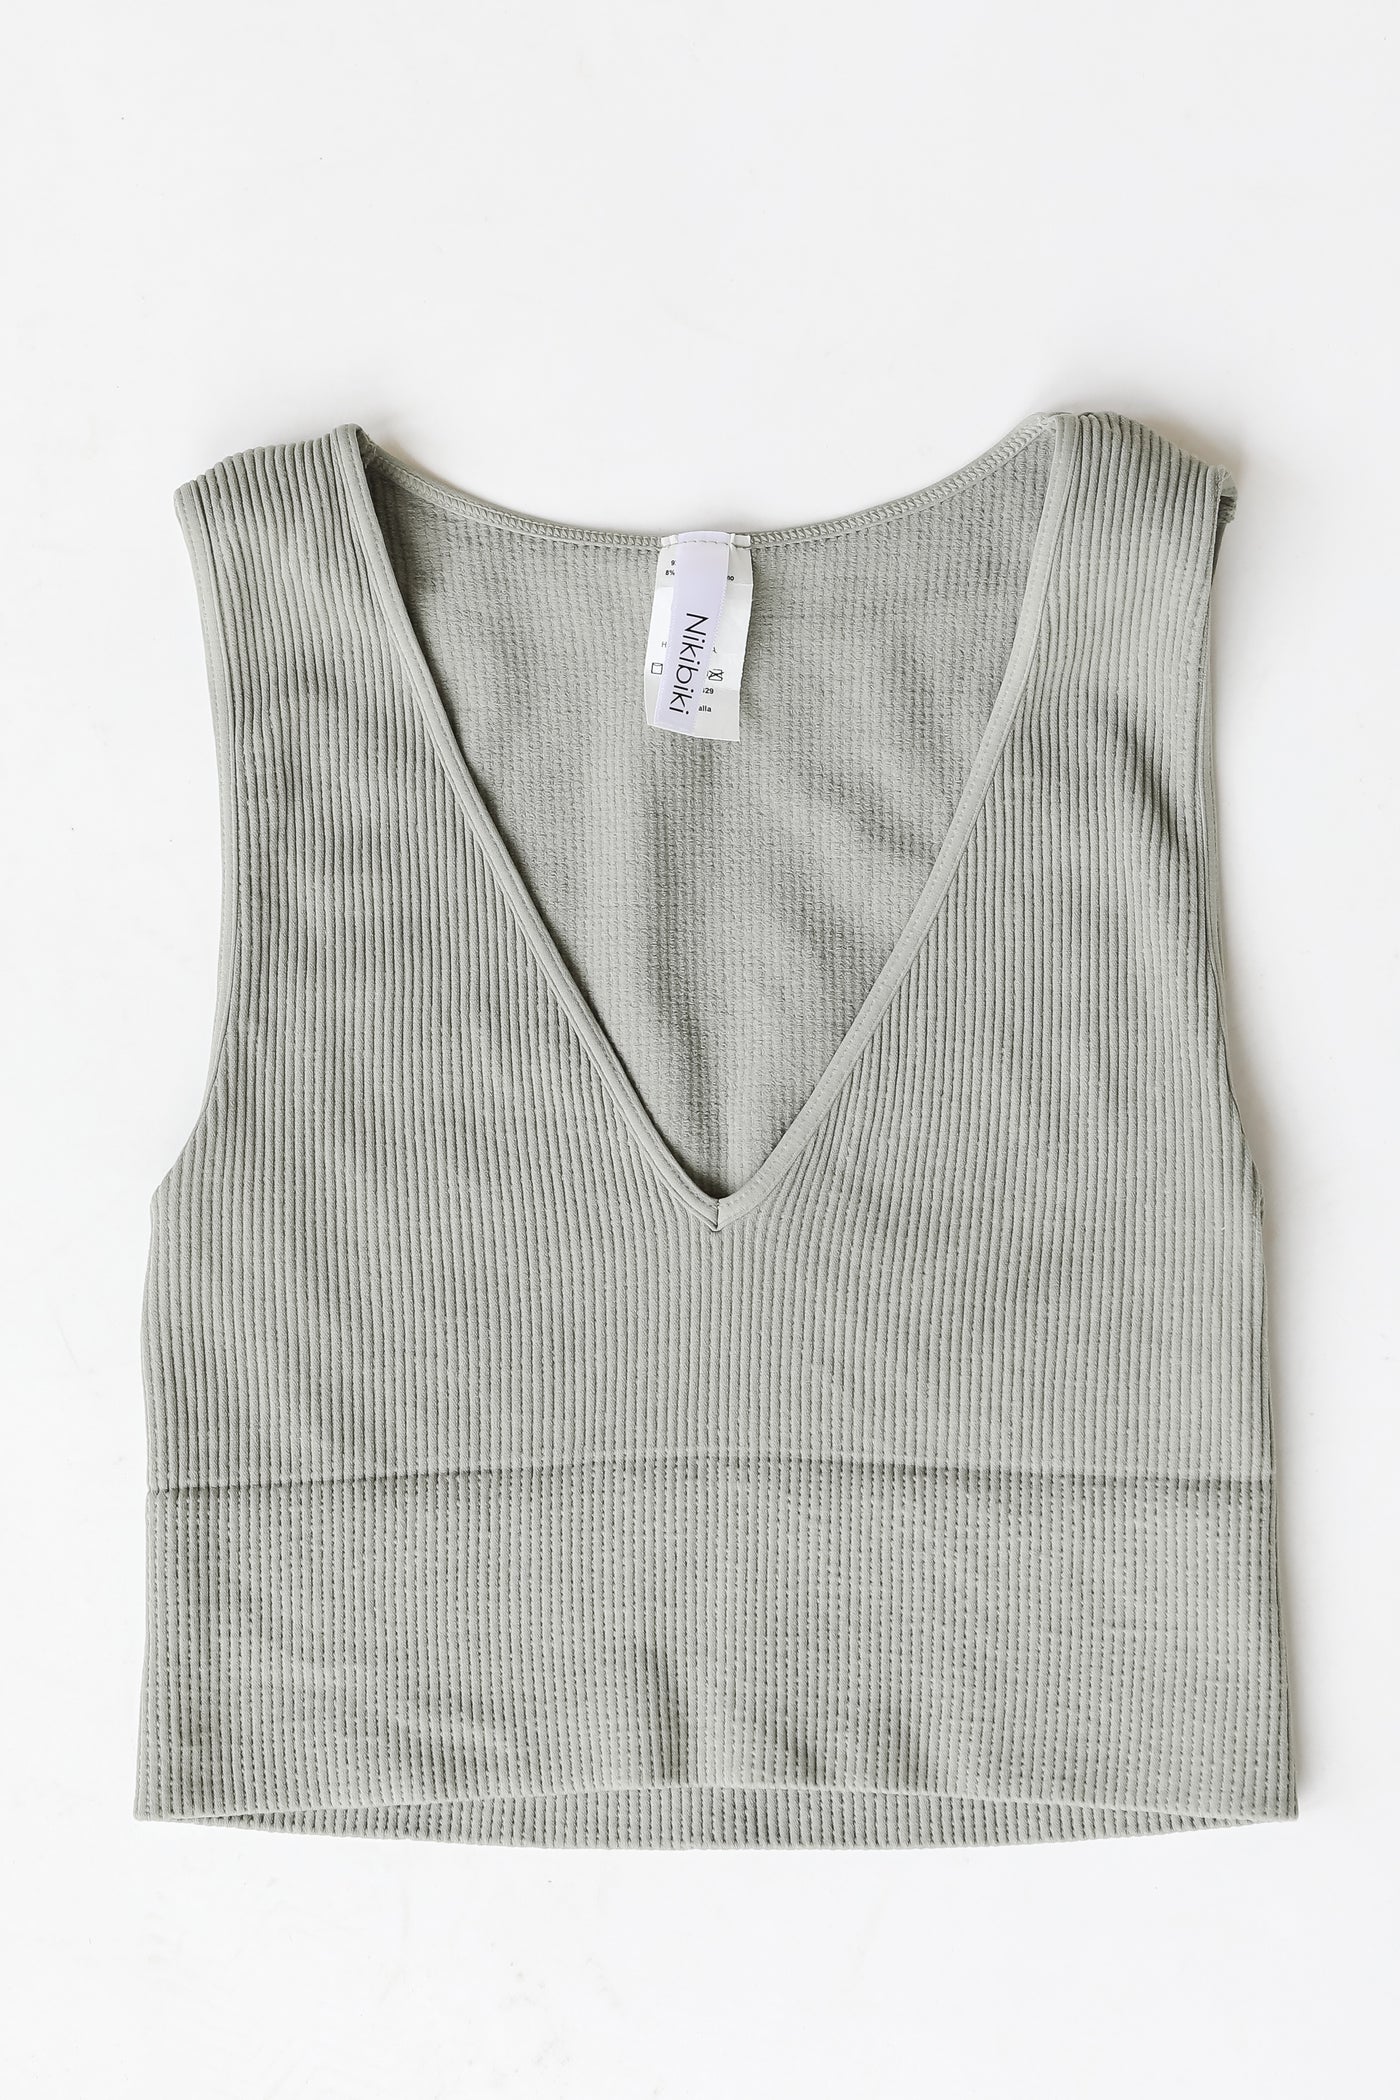 V-Neck Ribbed Cropped Tank in sage flat lay